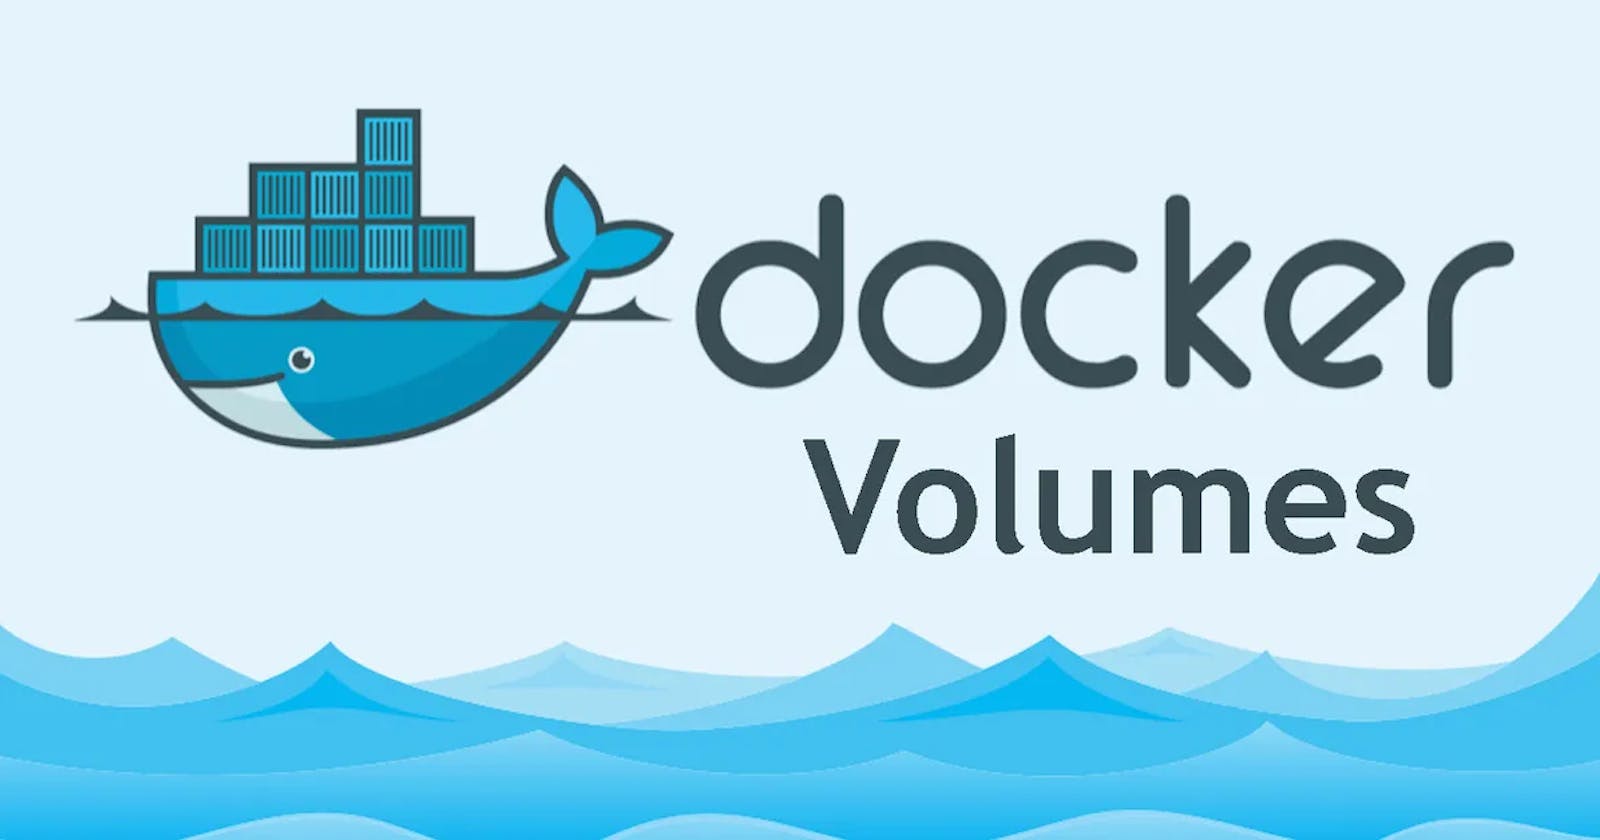 Working with Docker volumes